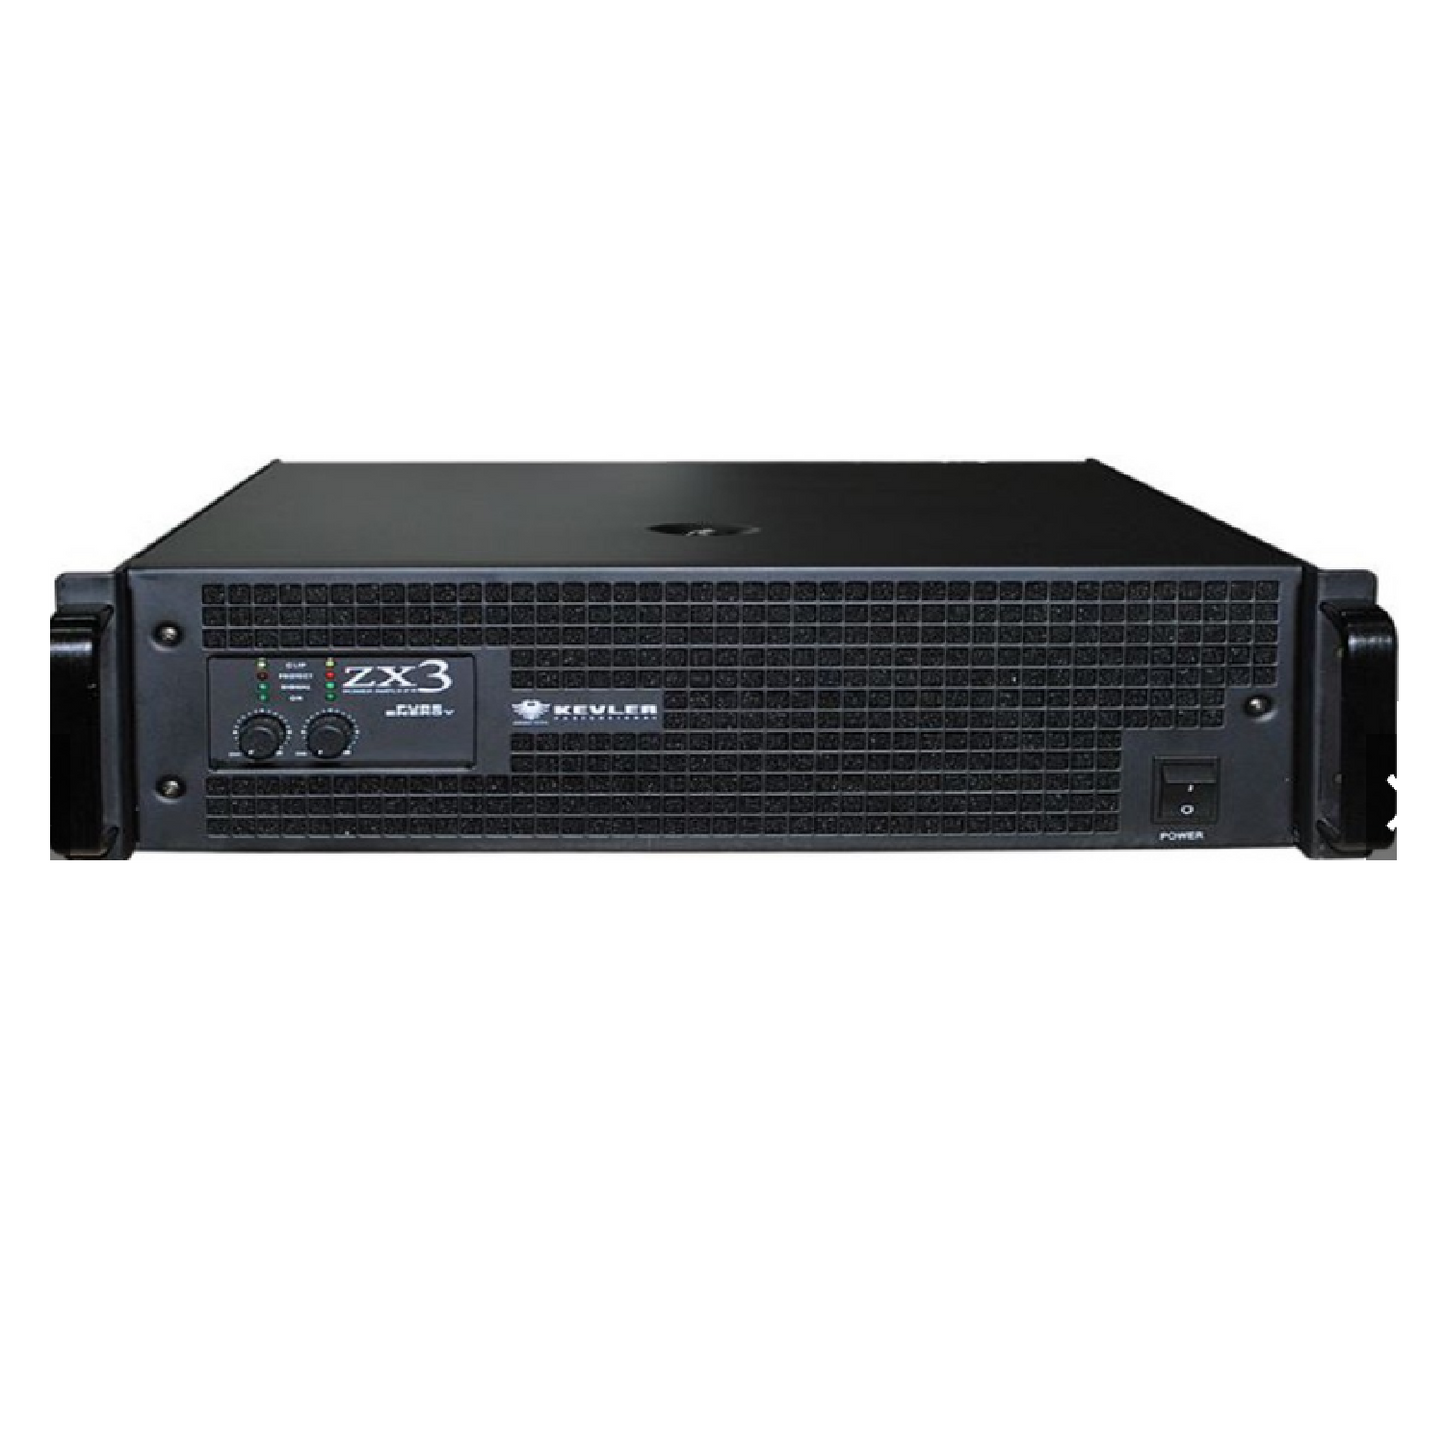 KEVLER ZX3 Series 7200W Power Amplifier Class H with Dual Variable Speed Fans, Stereo, Parallel and Bridge Mode Selection, Gain Control, Built-In Metal Chasis and Balance XLR Input